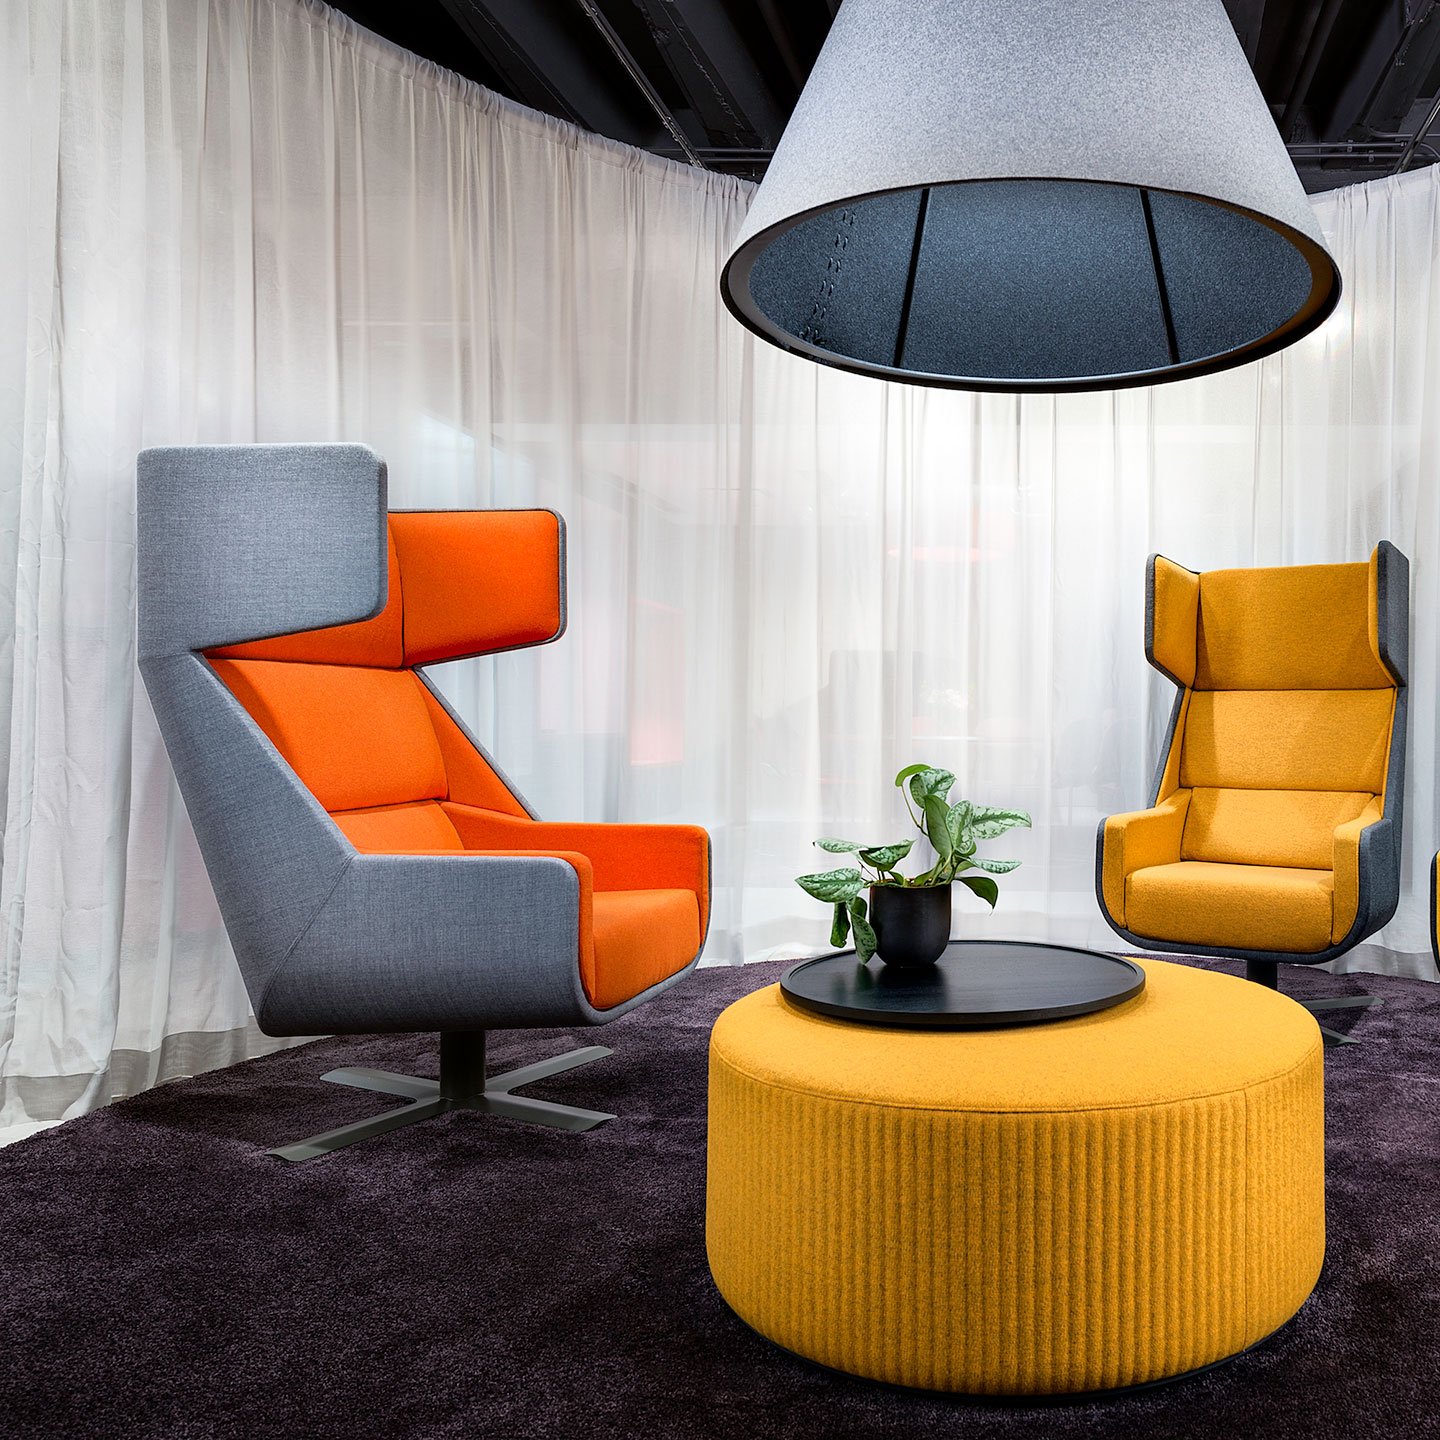 Haworth Buzzime chairs in orange, yellow and grey in a waiting area